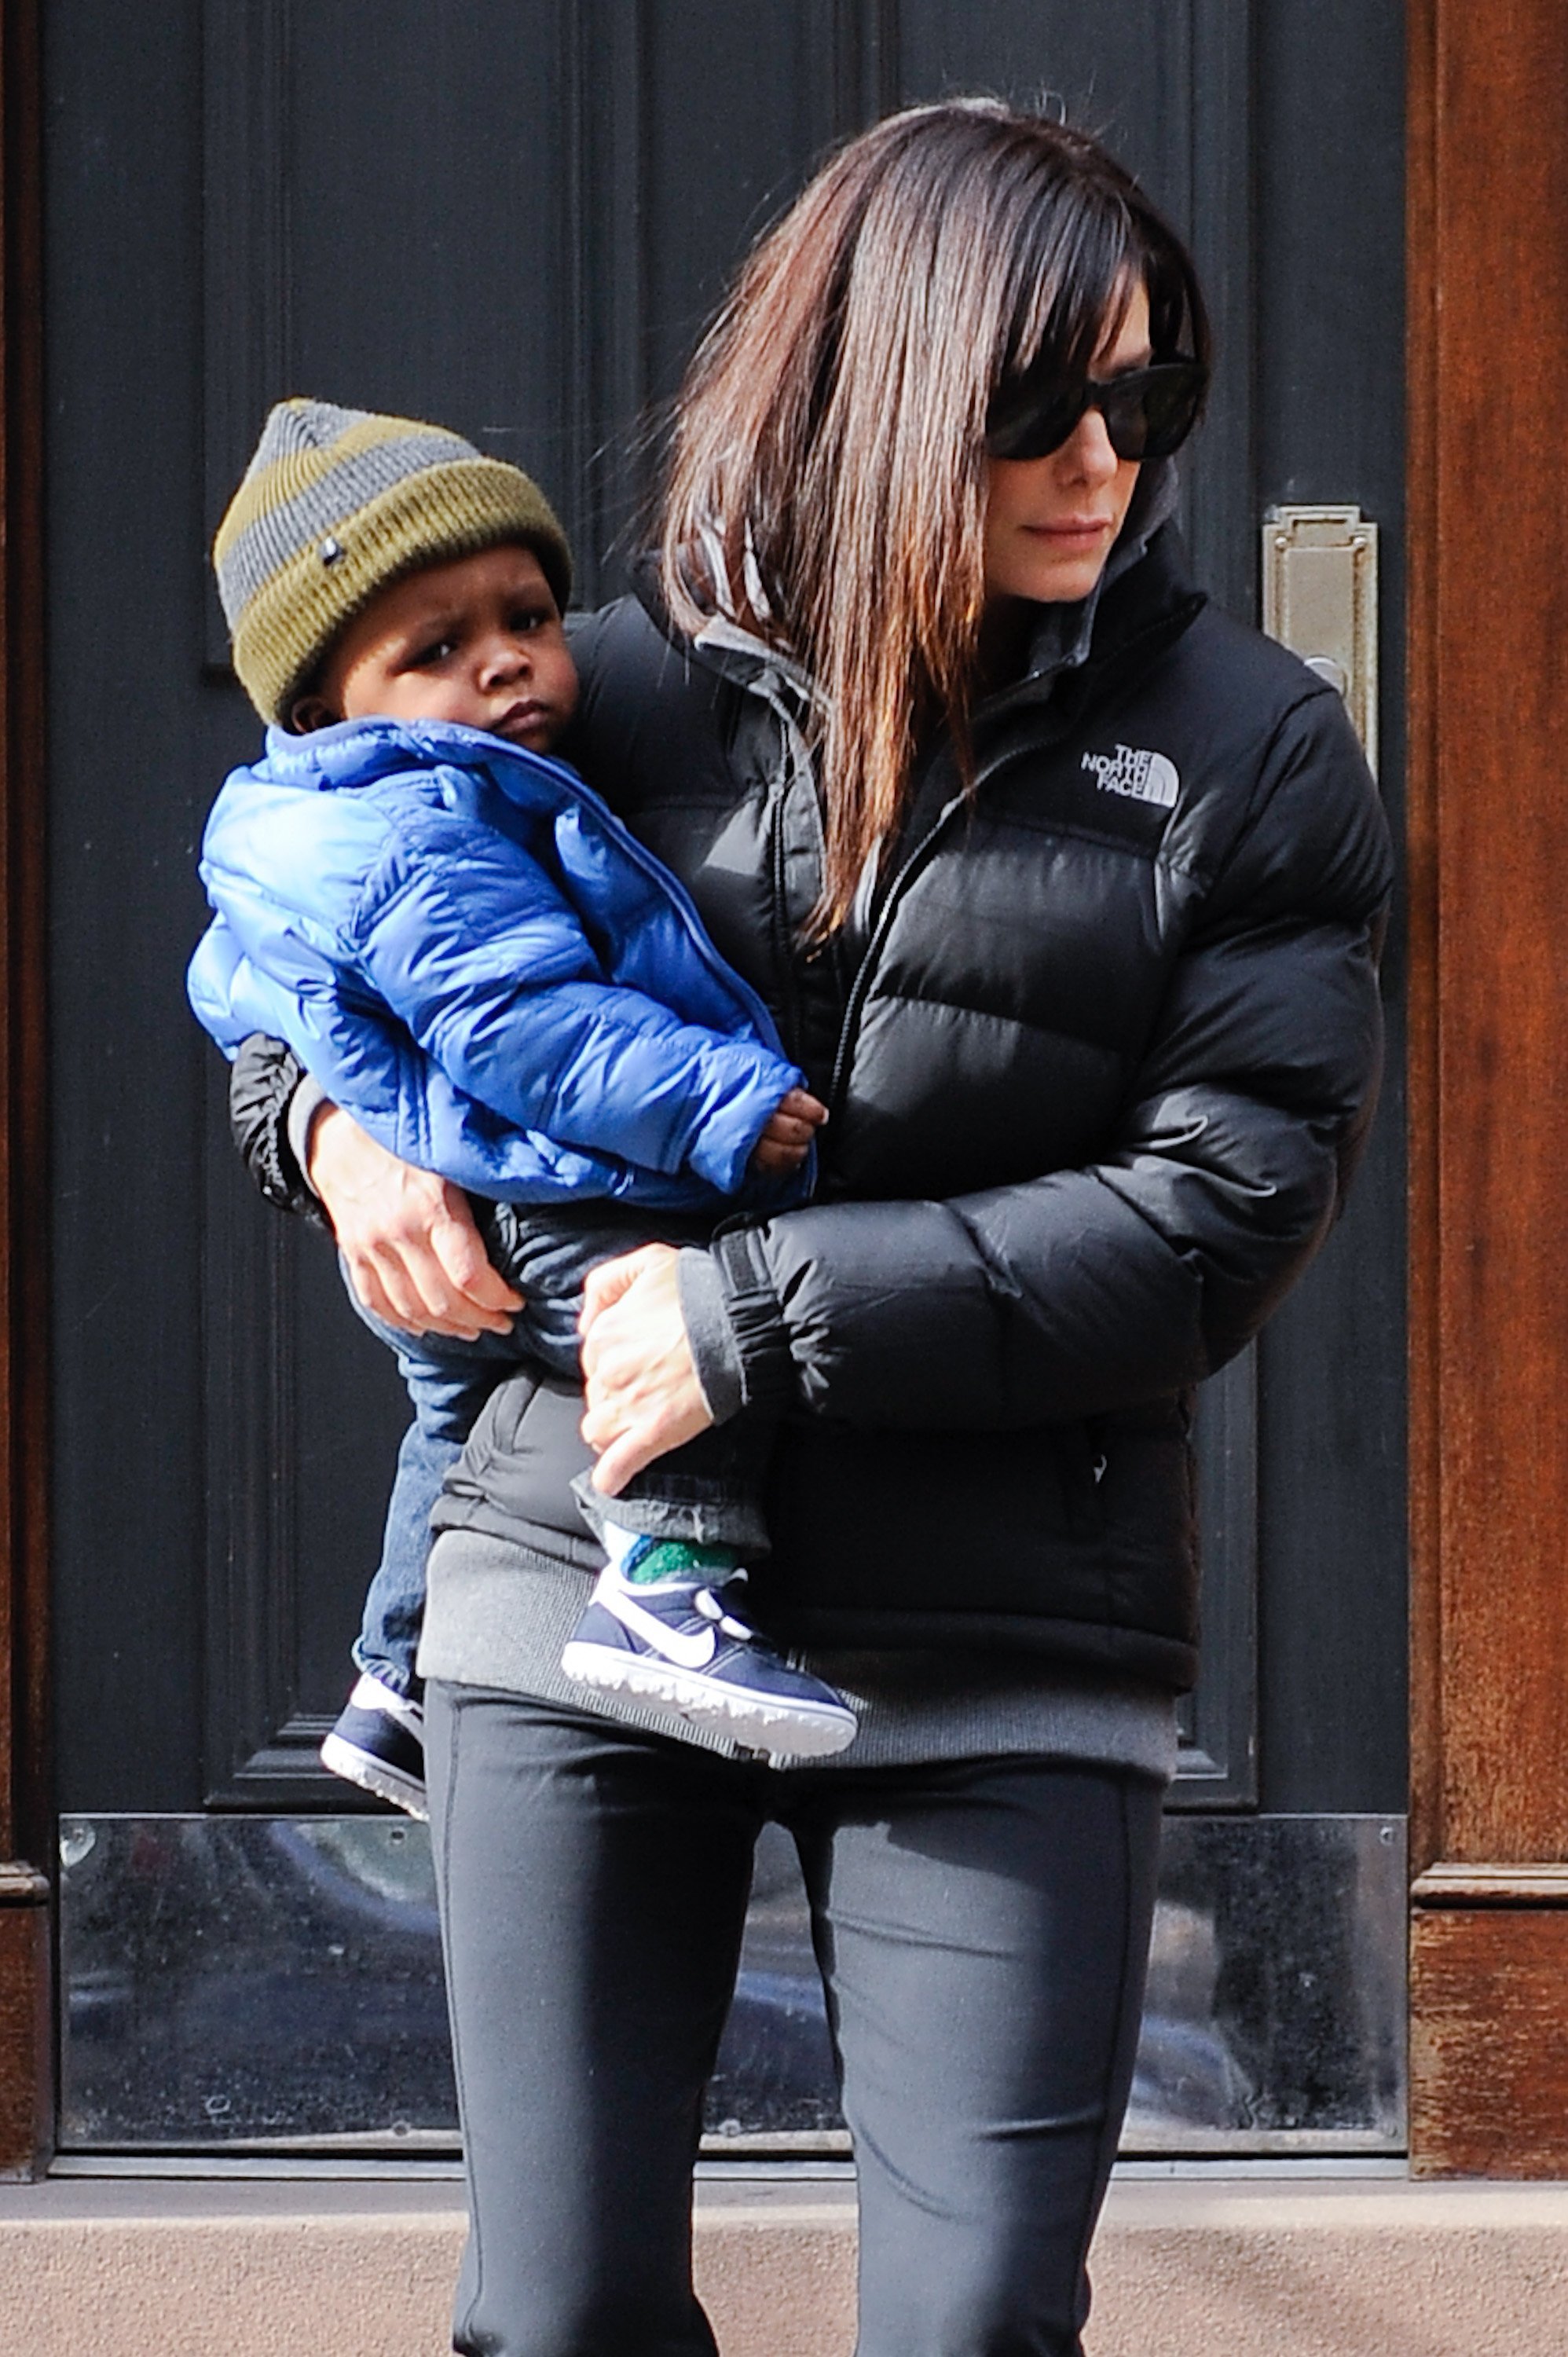 Sandra Bullock and her son Louis Bullock leaving their home in Soho, New York City on January 20, 2011 | Photo: Getty Images